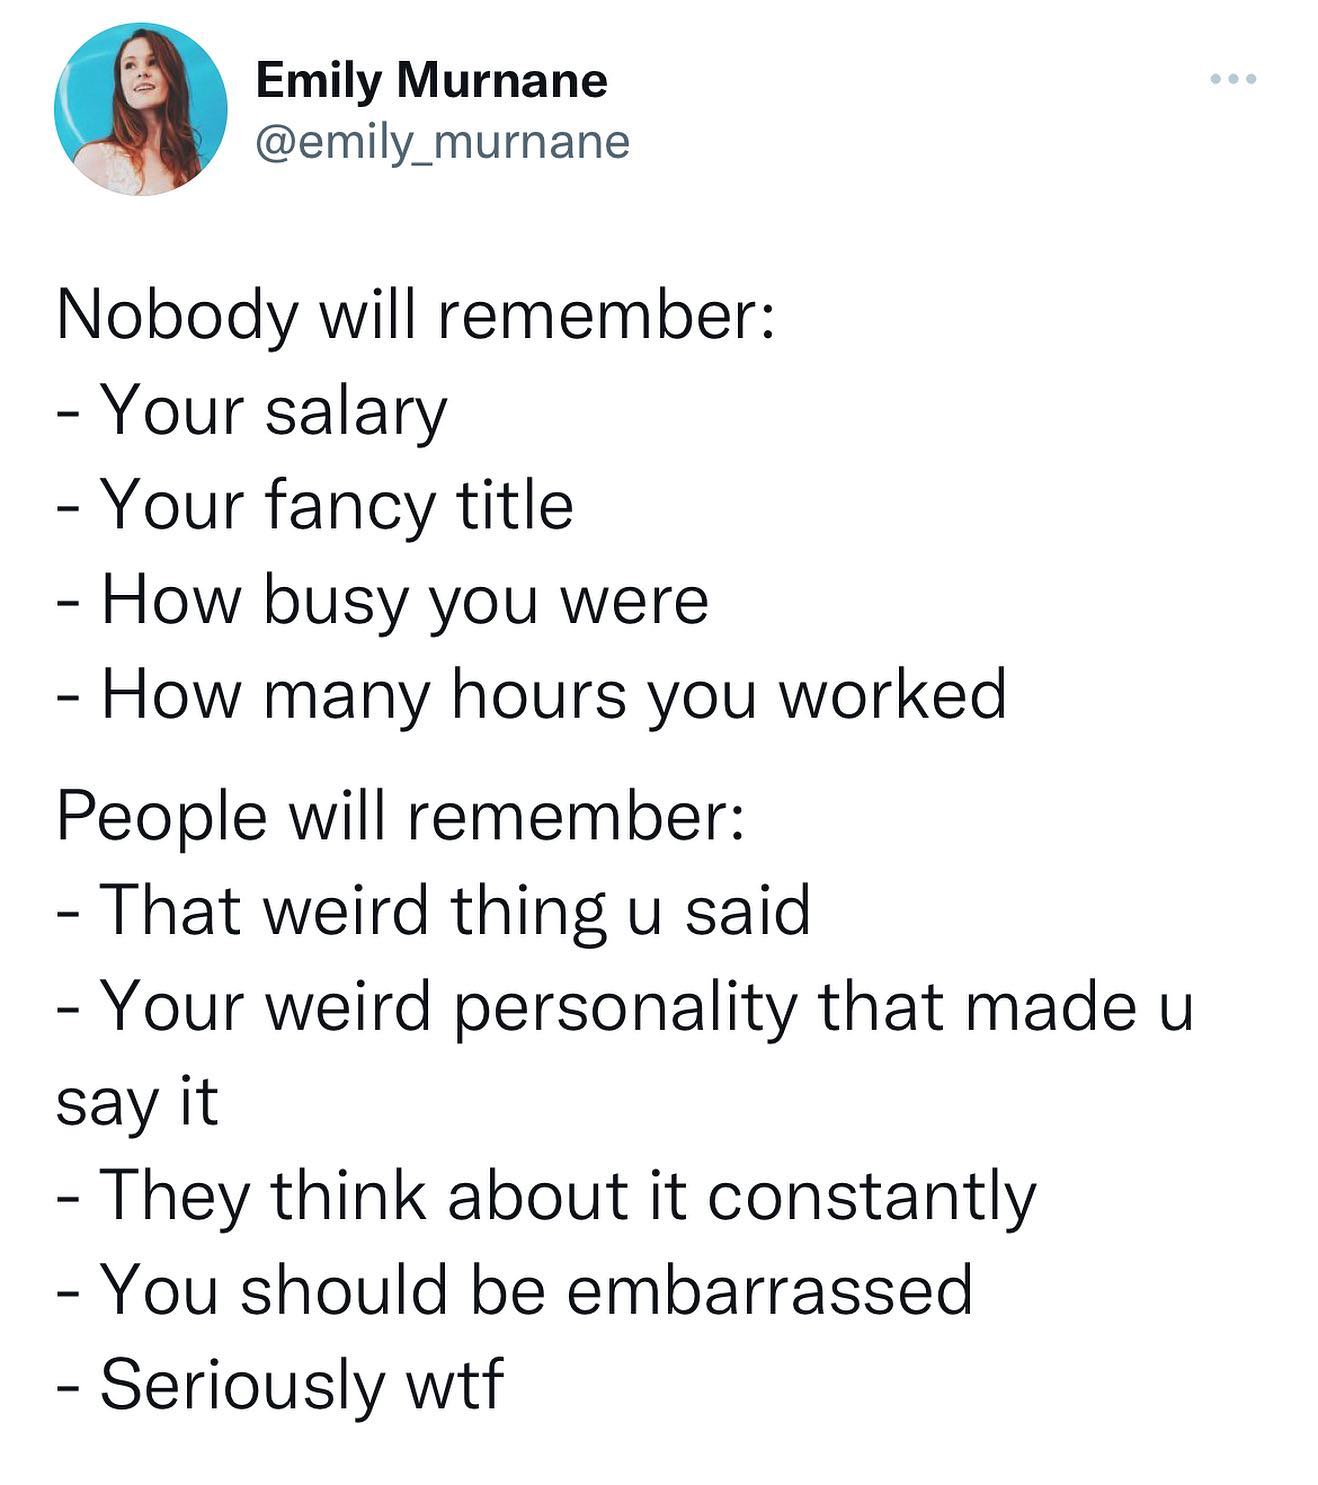 funny twitter postsw - Emily Murnane Nobody will remember Your salary Your fancy title How busy you were How many hours you worked People will remember That weird thing u said Your weird personality that made u say it They think about it constantly You sh